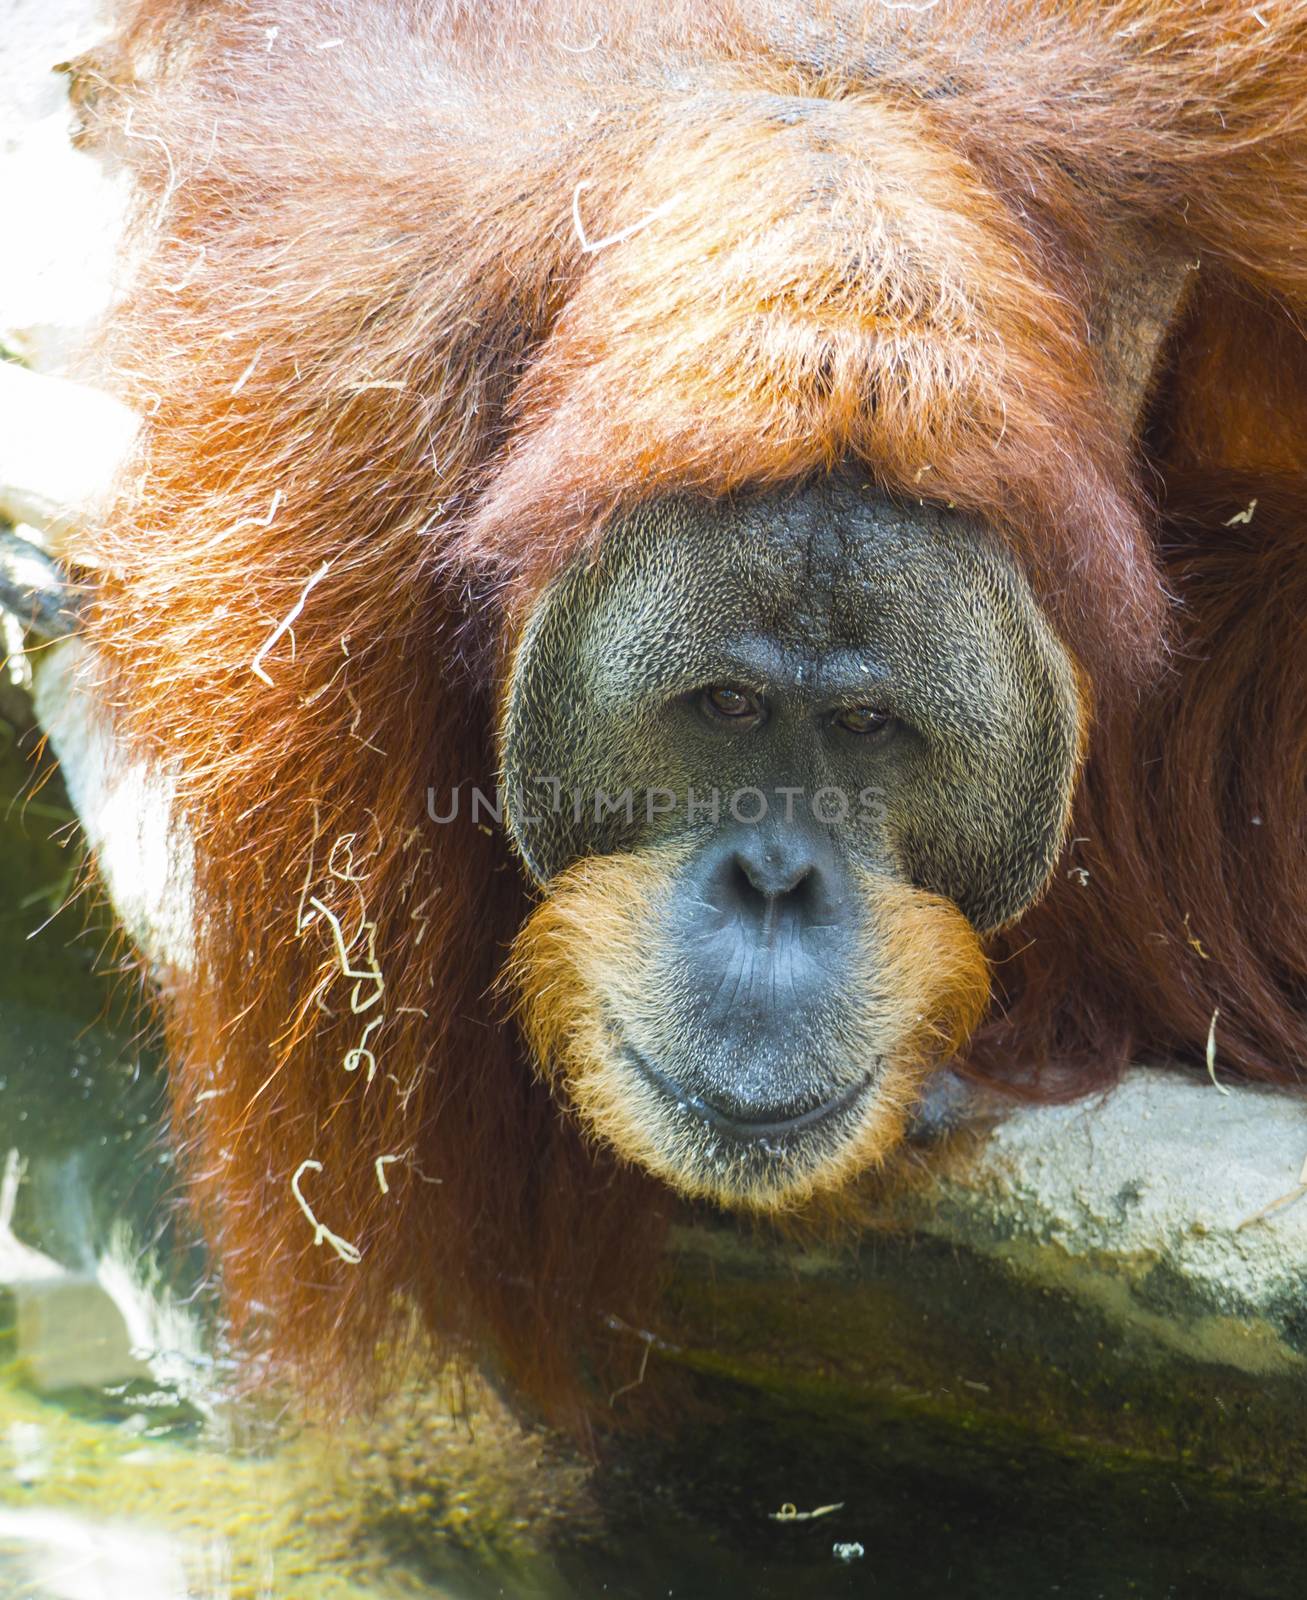 Close-up portrait of an adult male of Sumatran orangutan, Pongo abelii sad looking, frot view. Sumatran orangutan is endemic to the north of Sumatra and is critically endangered